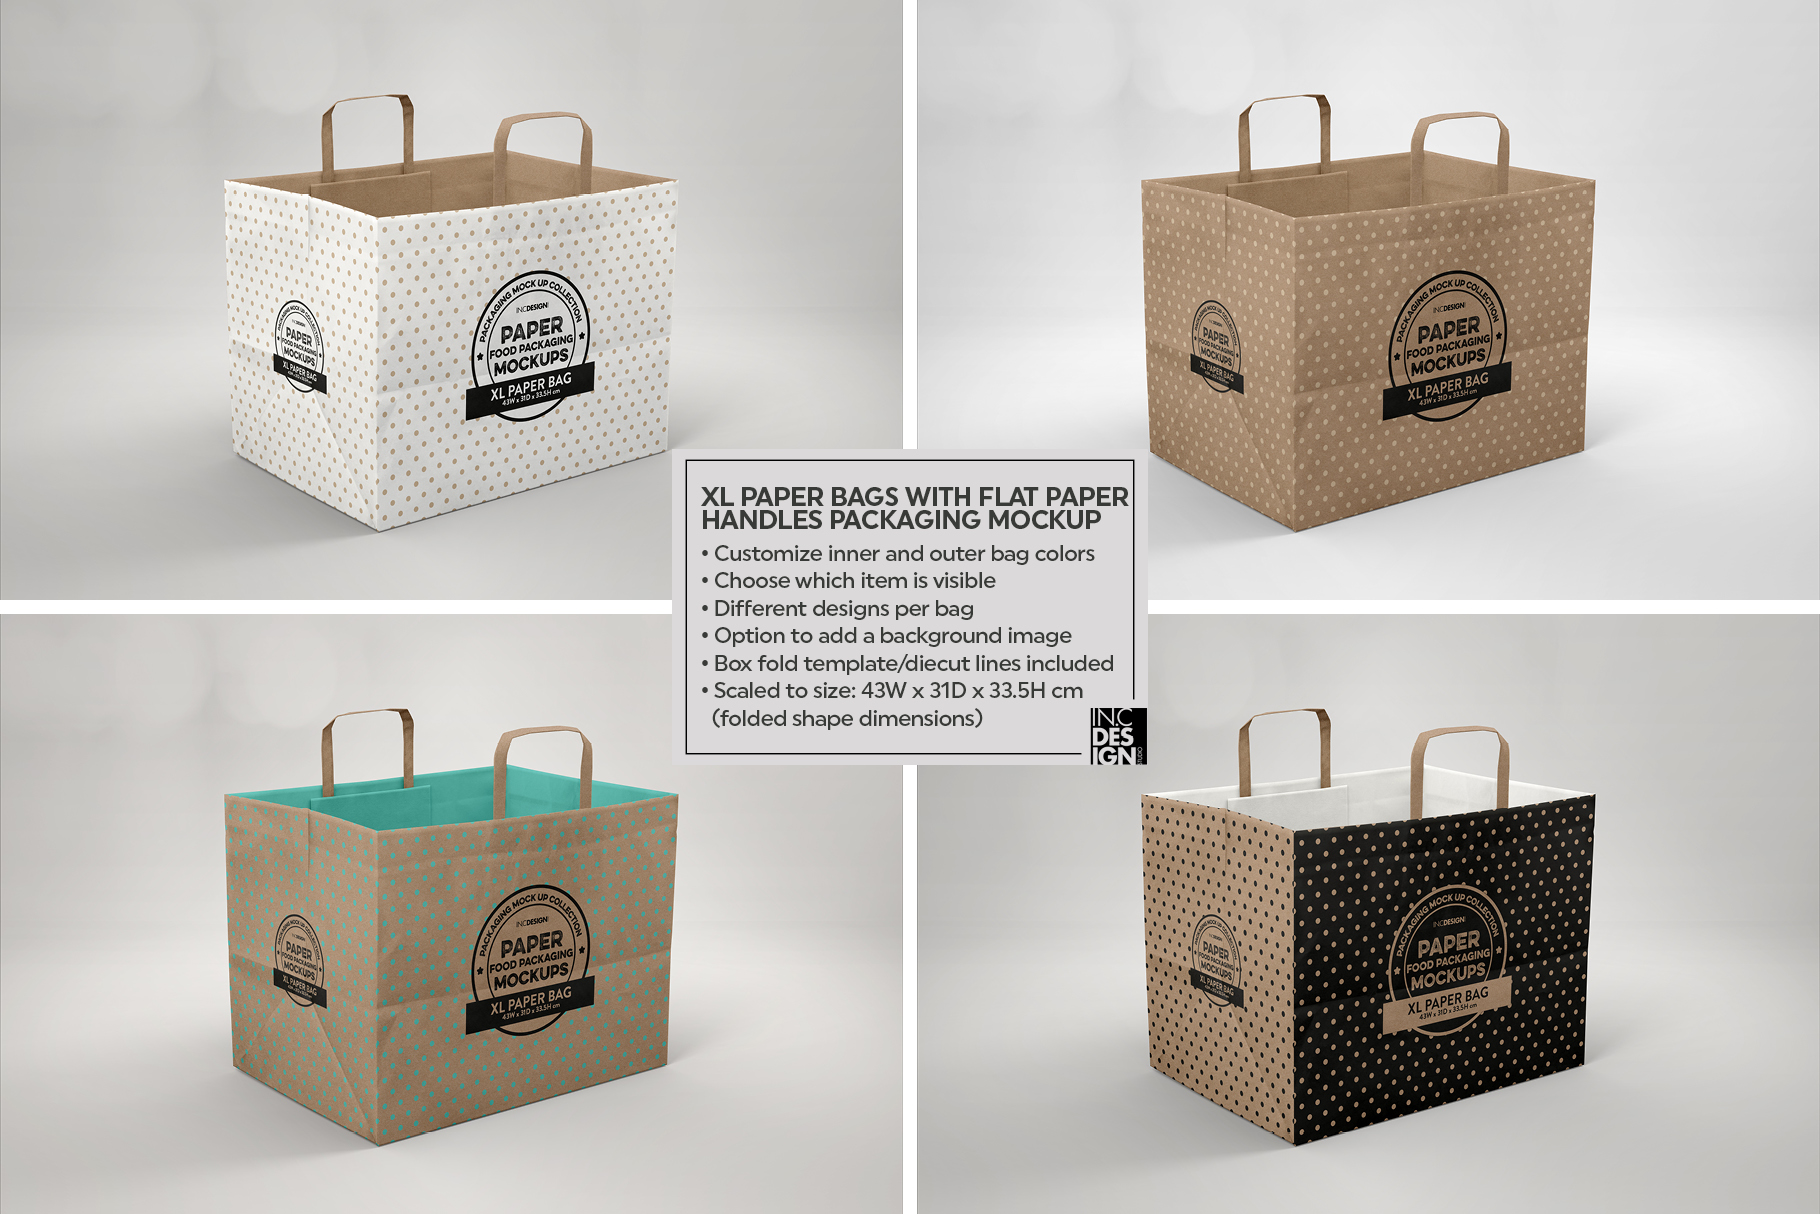 Download XL Paper Bag with Flat Handles Packaging Mockup (284096 ...